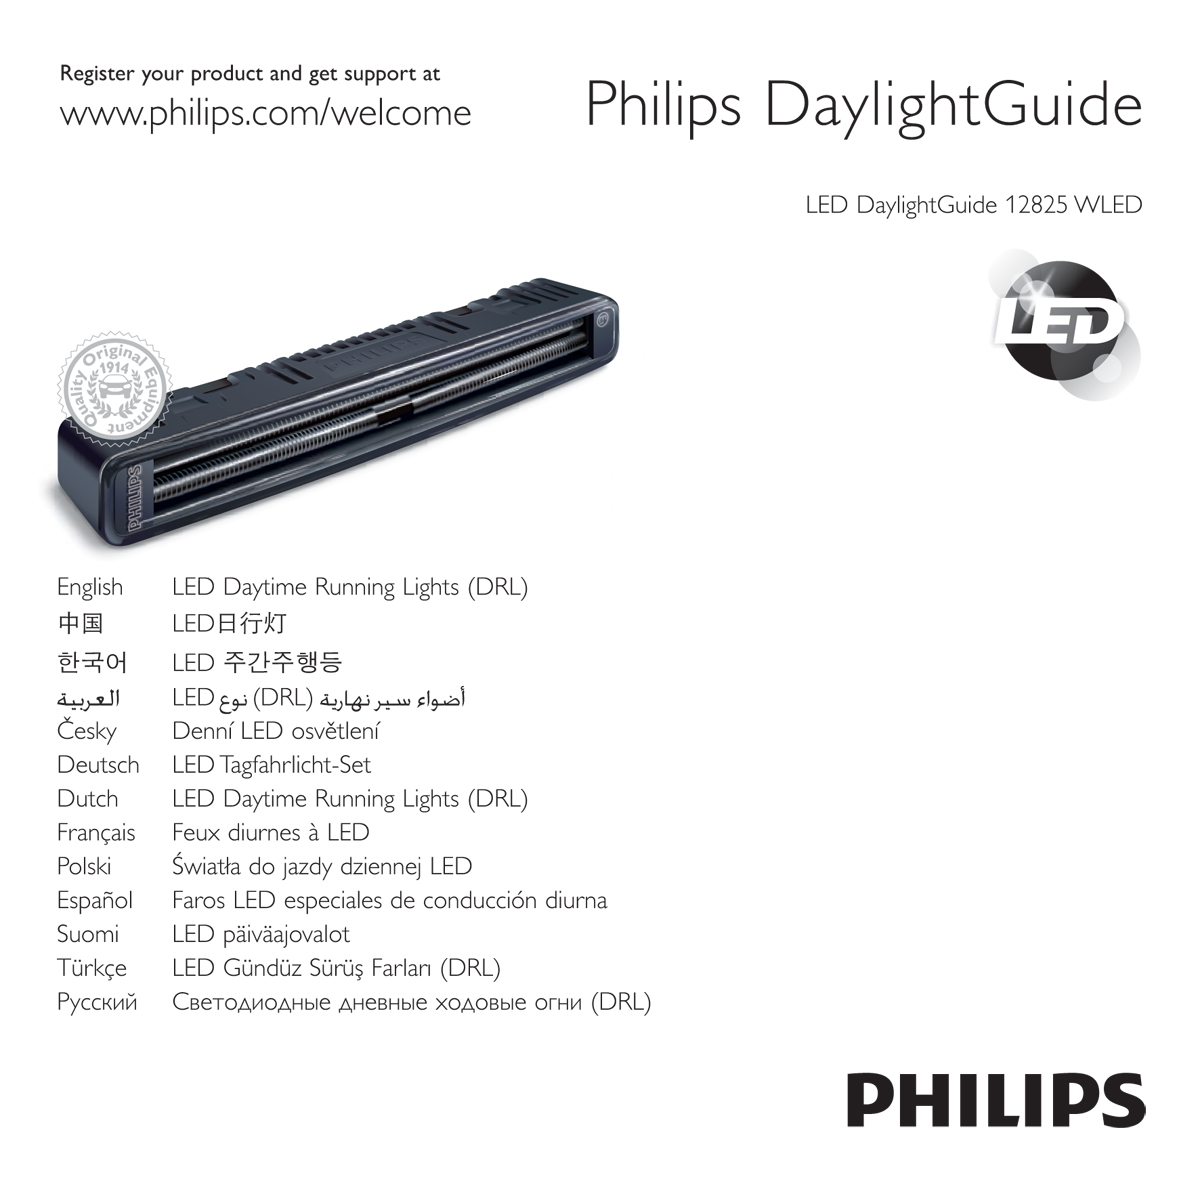 Philips LED DaylightGuide user guide - complete pdf